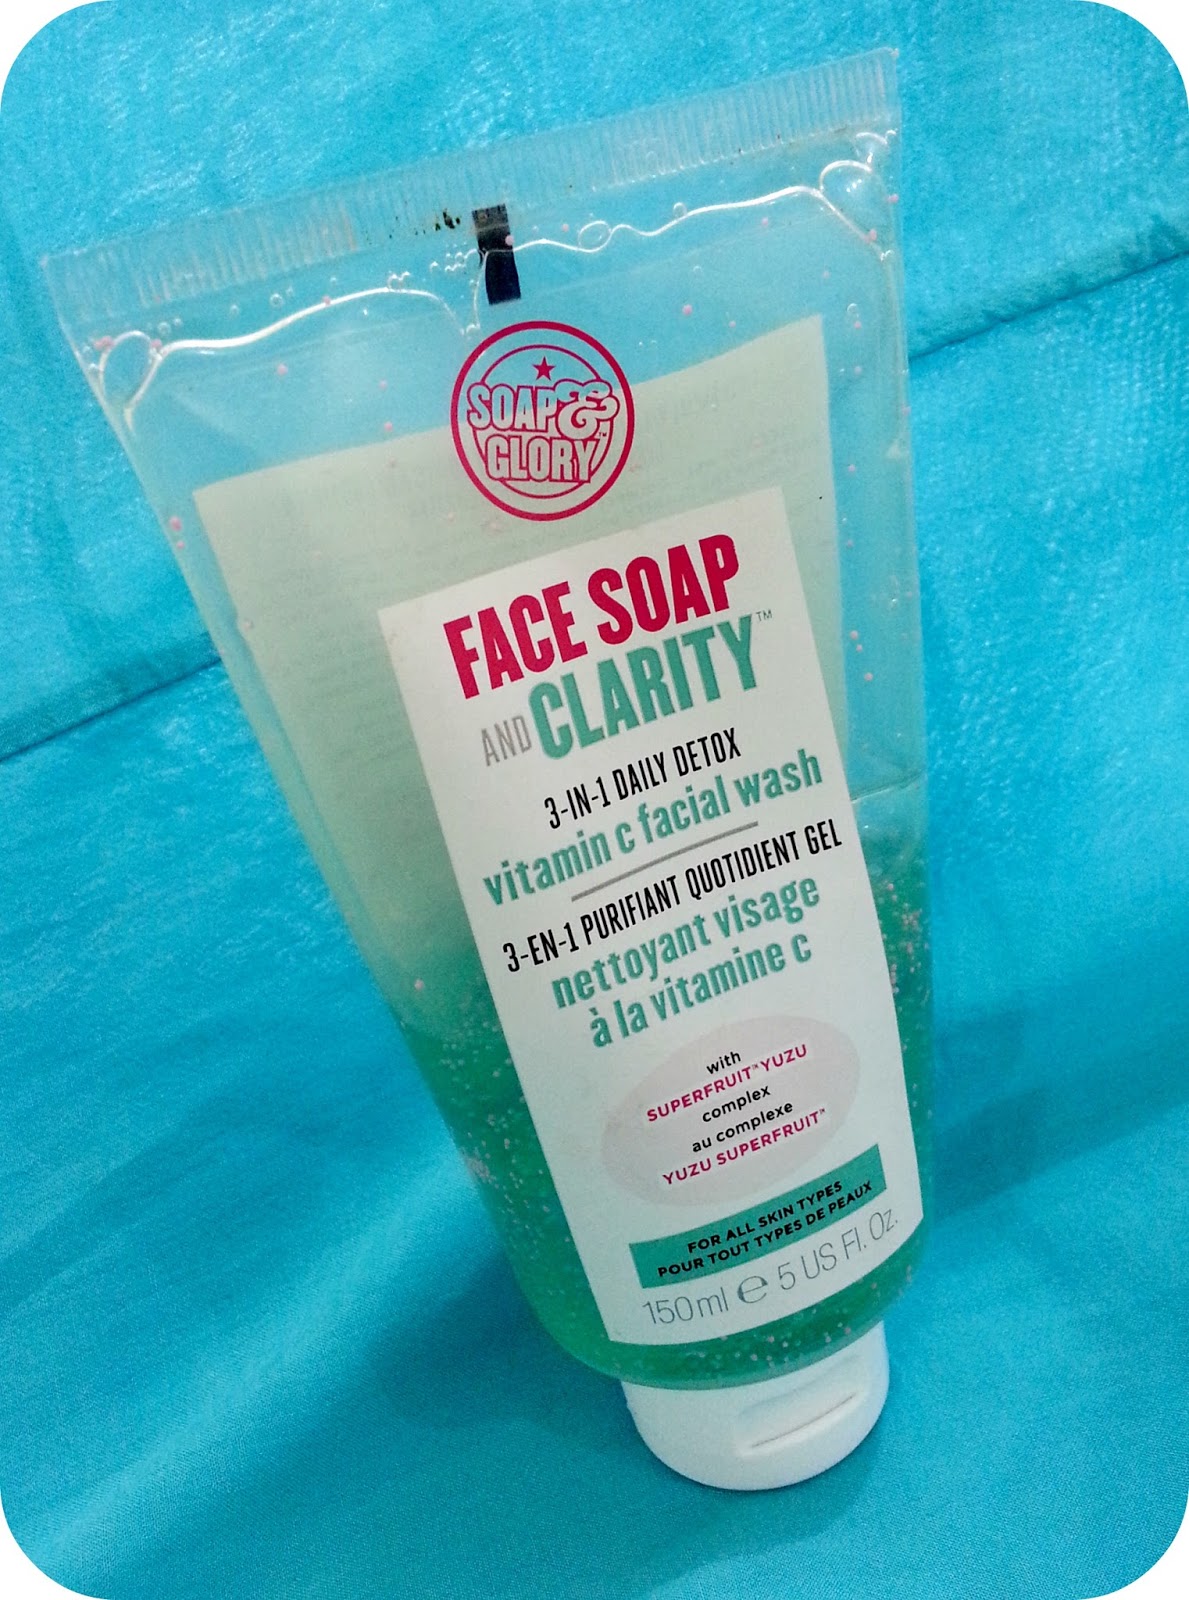 Pink Clouds: Soap & Glory Face Soap and Clarity - 3 in 1 ...